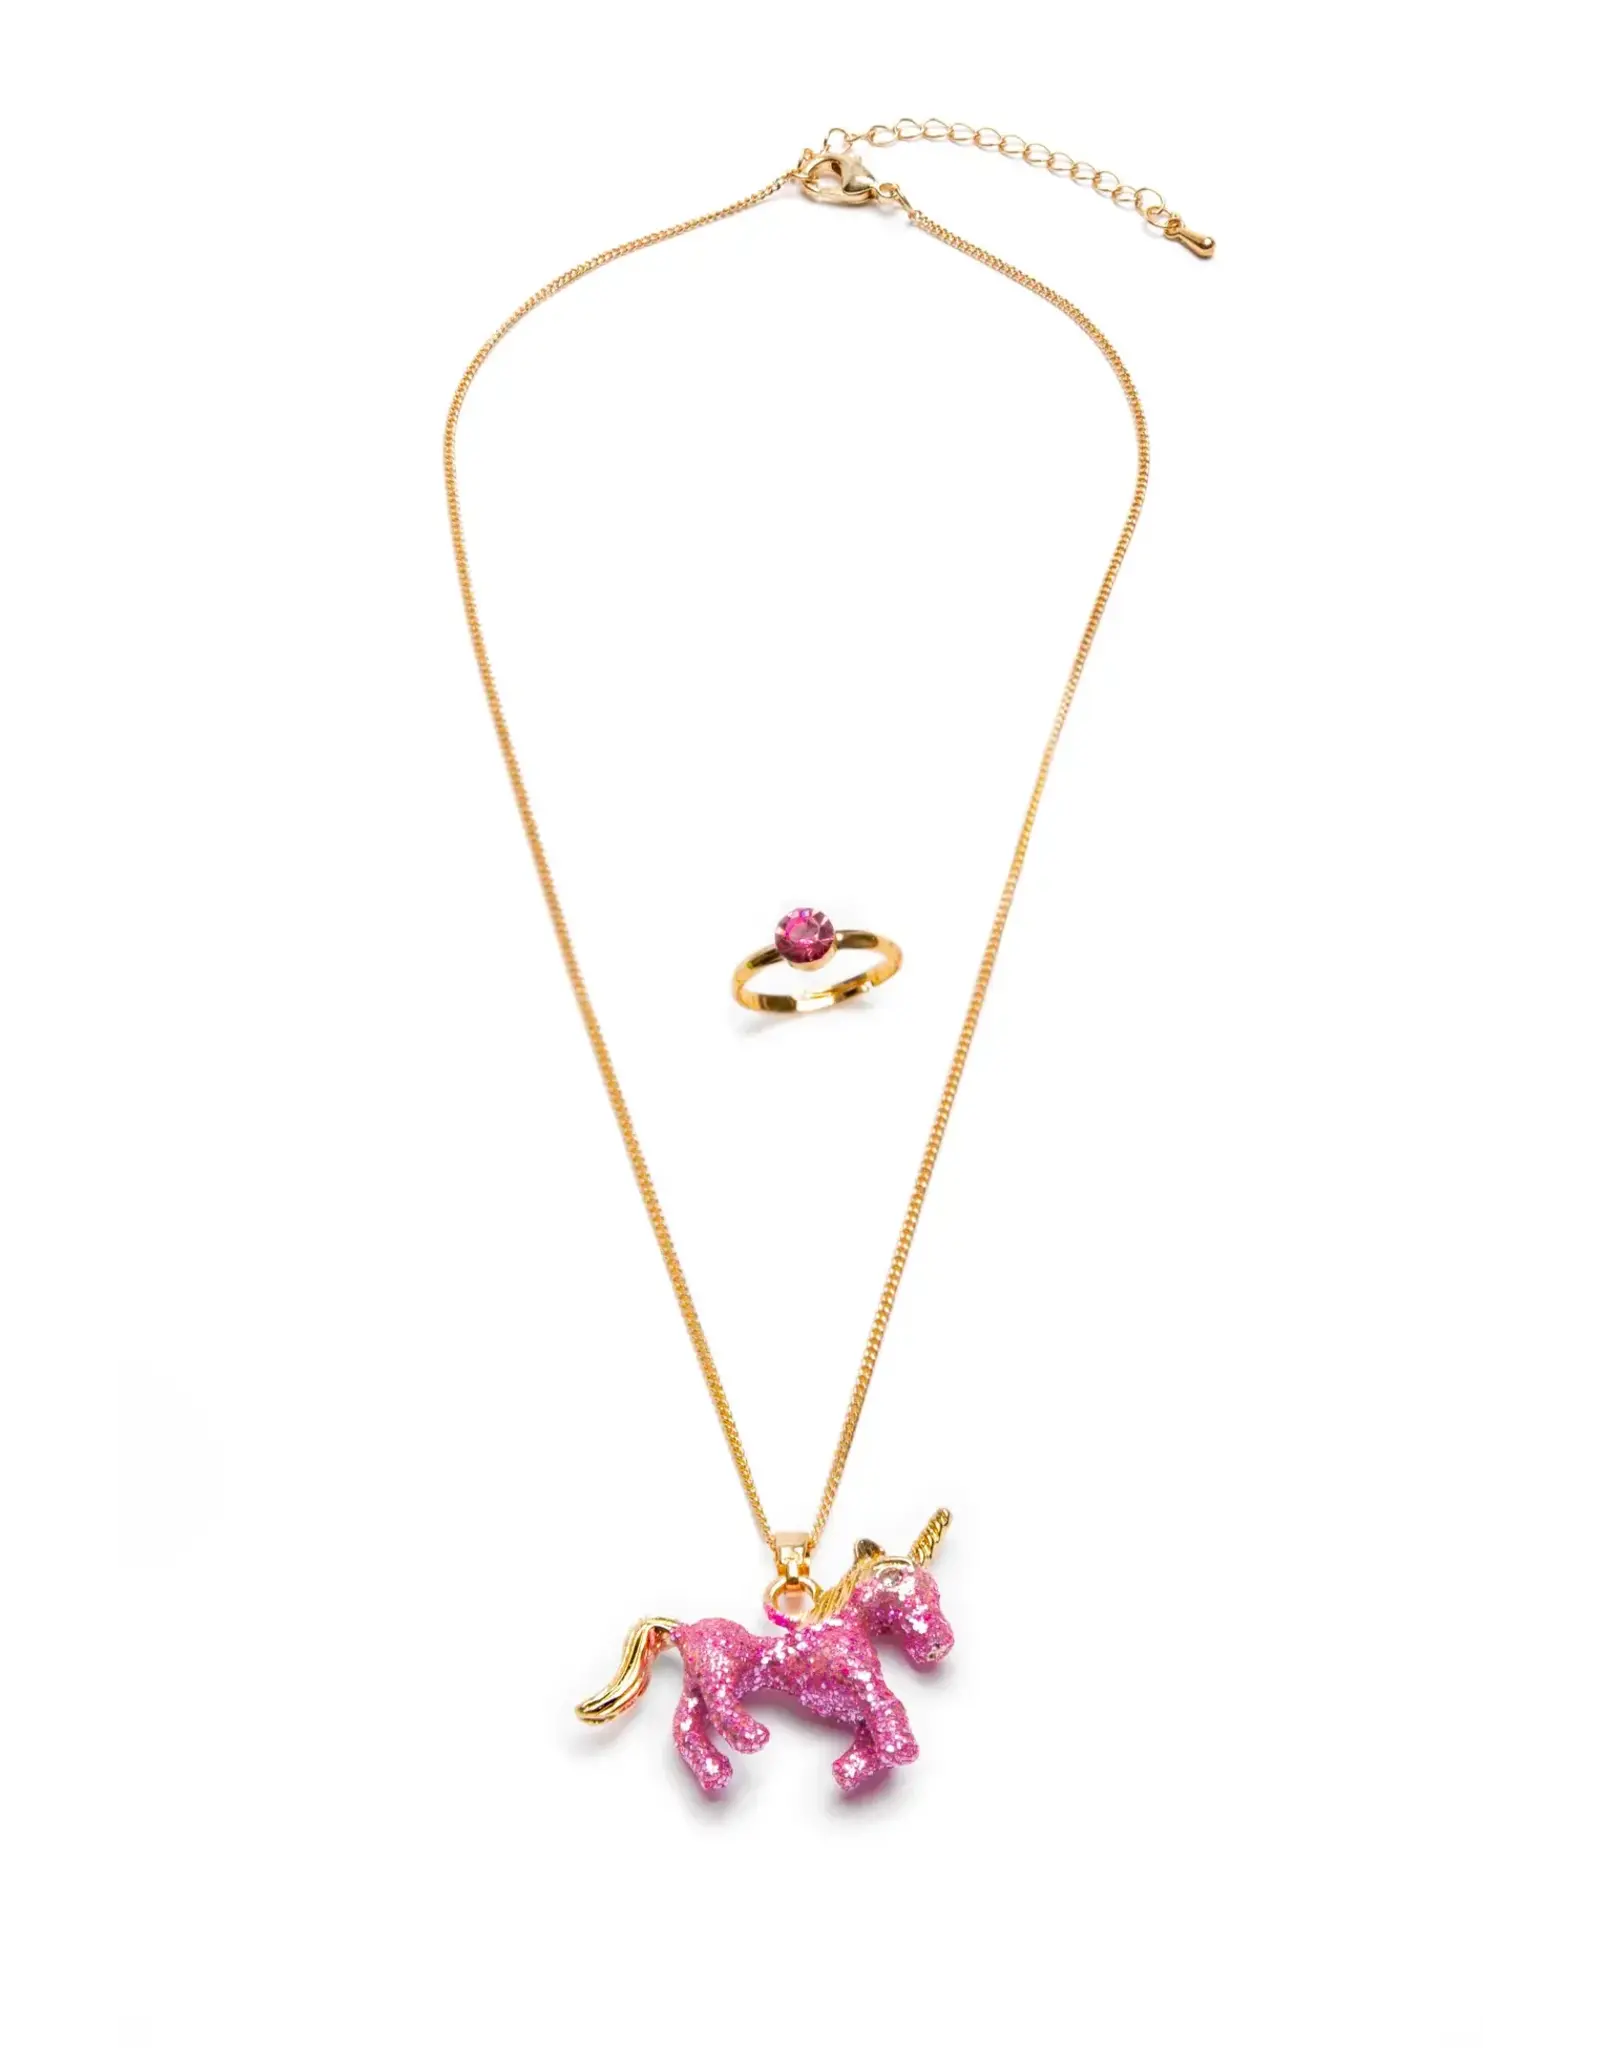 Great Pretenders Glitter Pink Unicorn Necklace and Ring Set